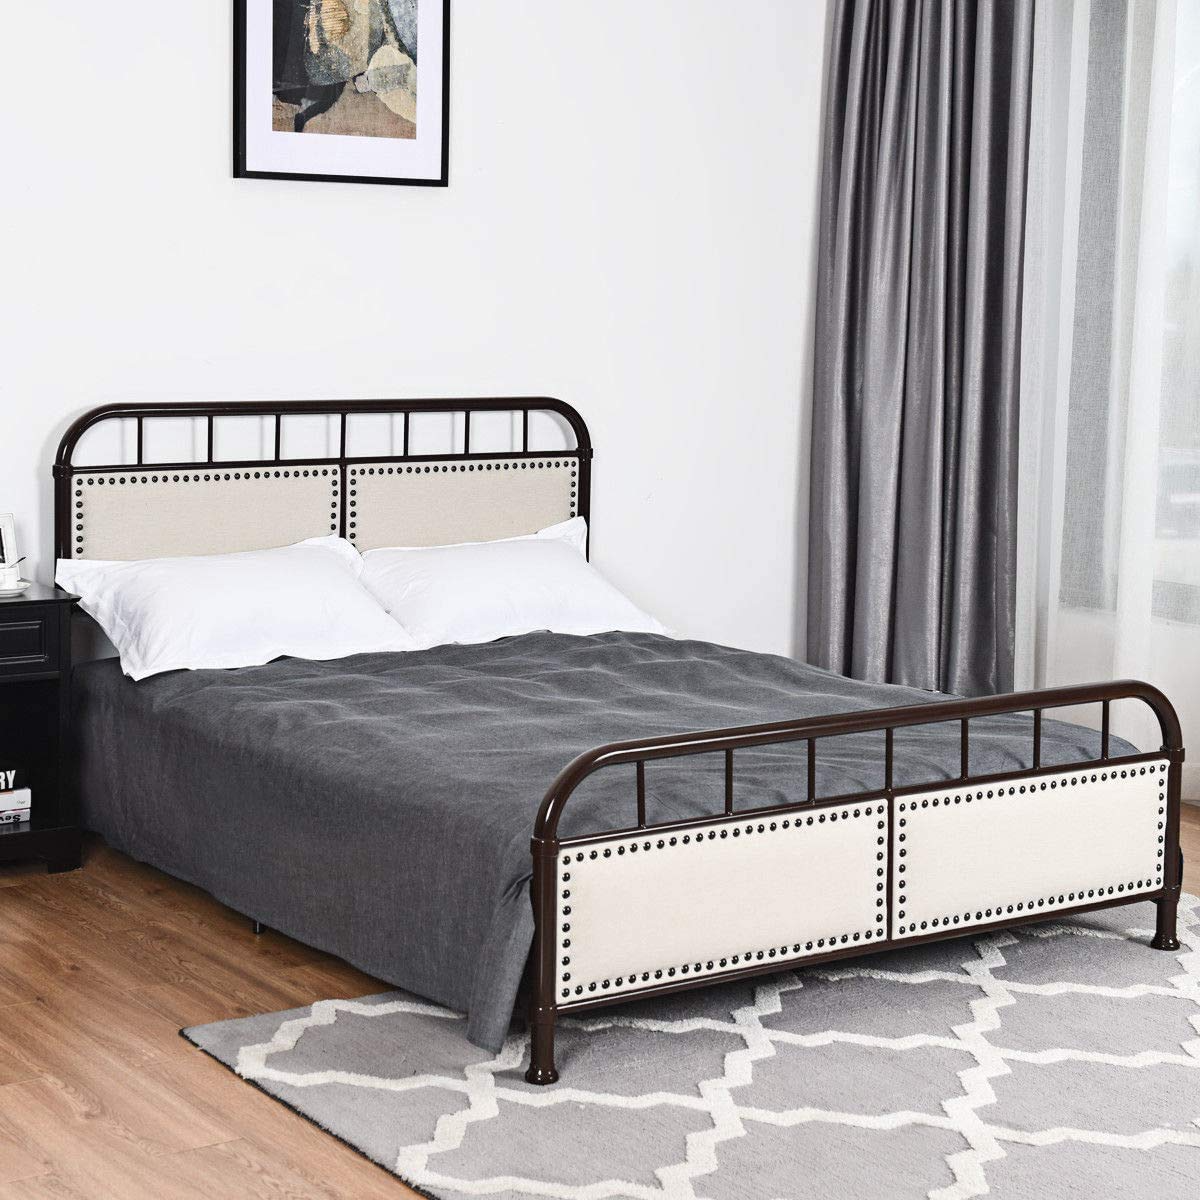 Queen Size Vintage Metal Platform Bed with Button Tufted Headboard & Footboard